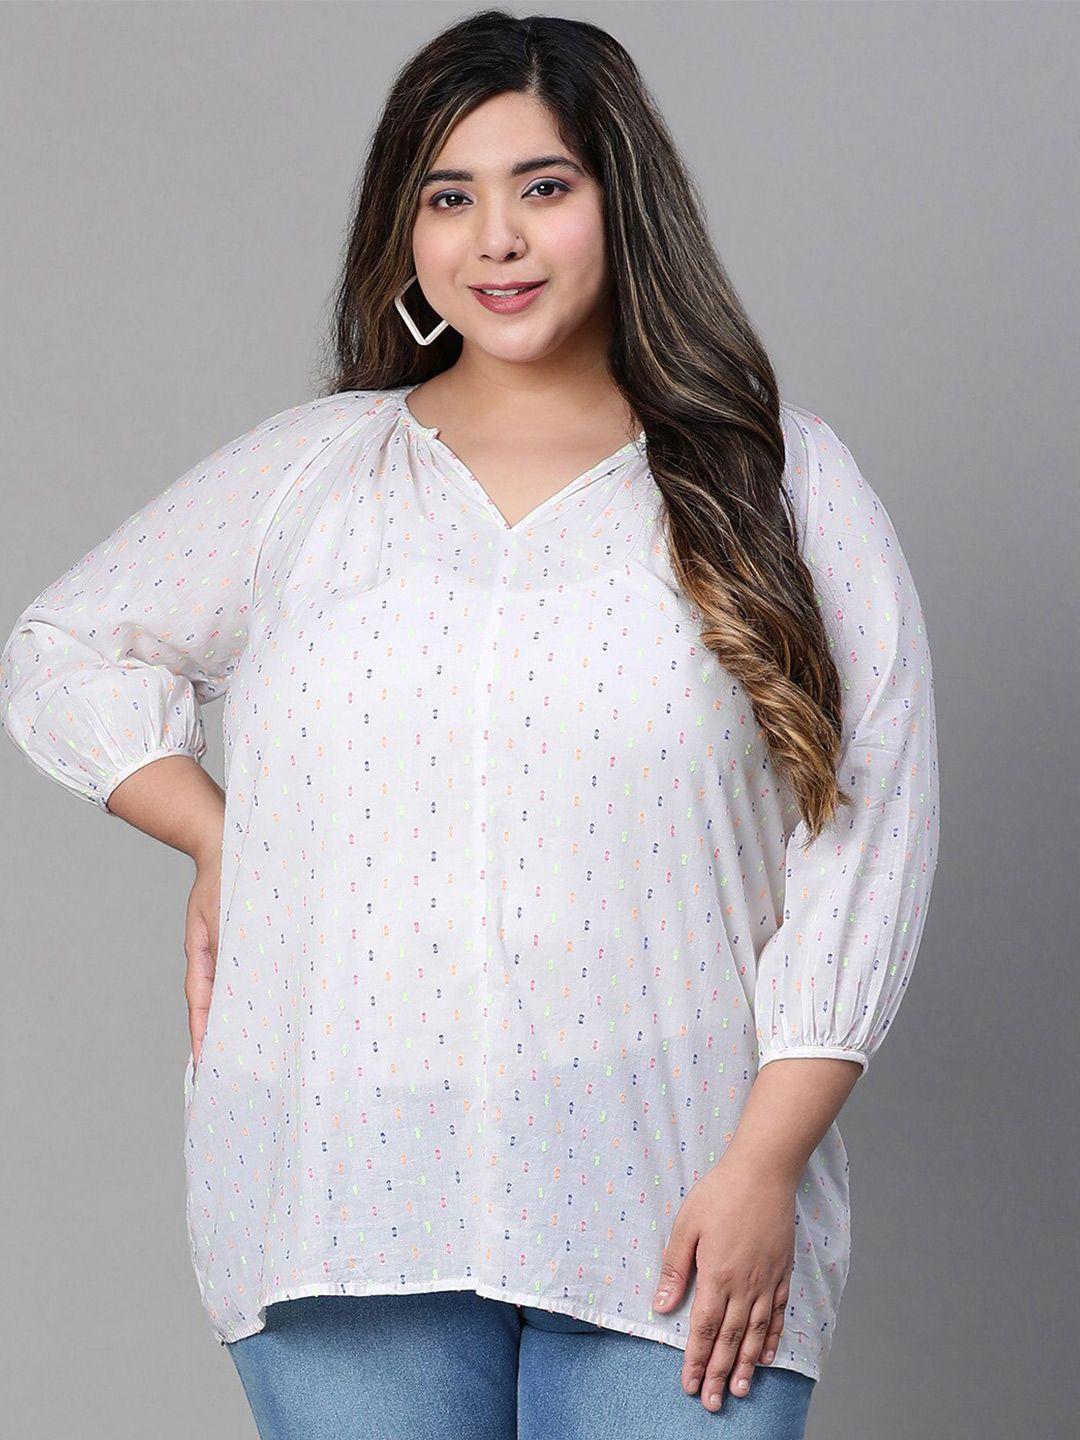 oxolloxo-plus-size-abstract-printed-v-neck-cotton-top